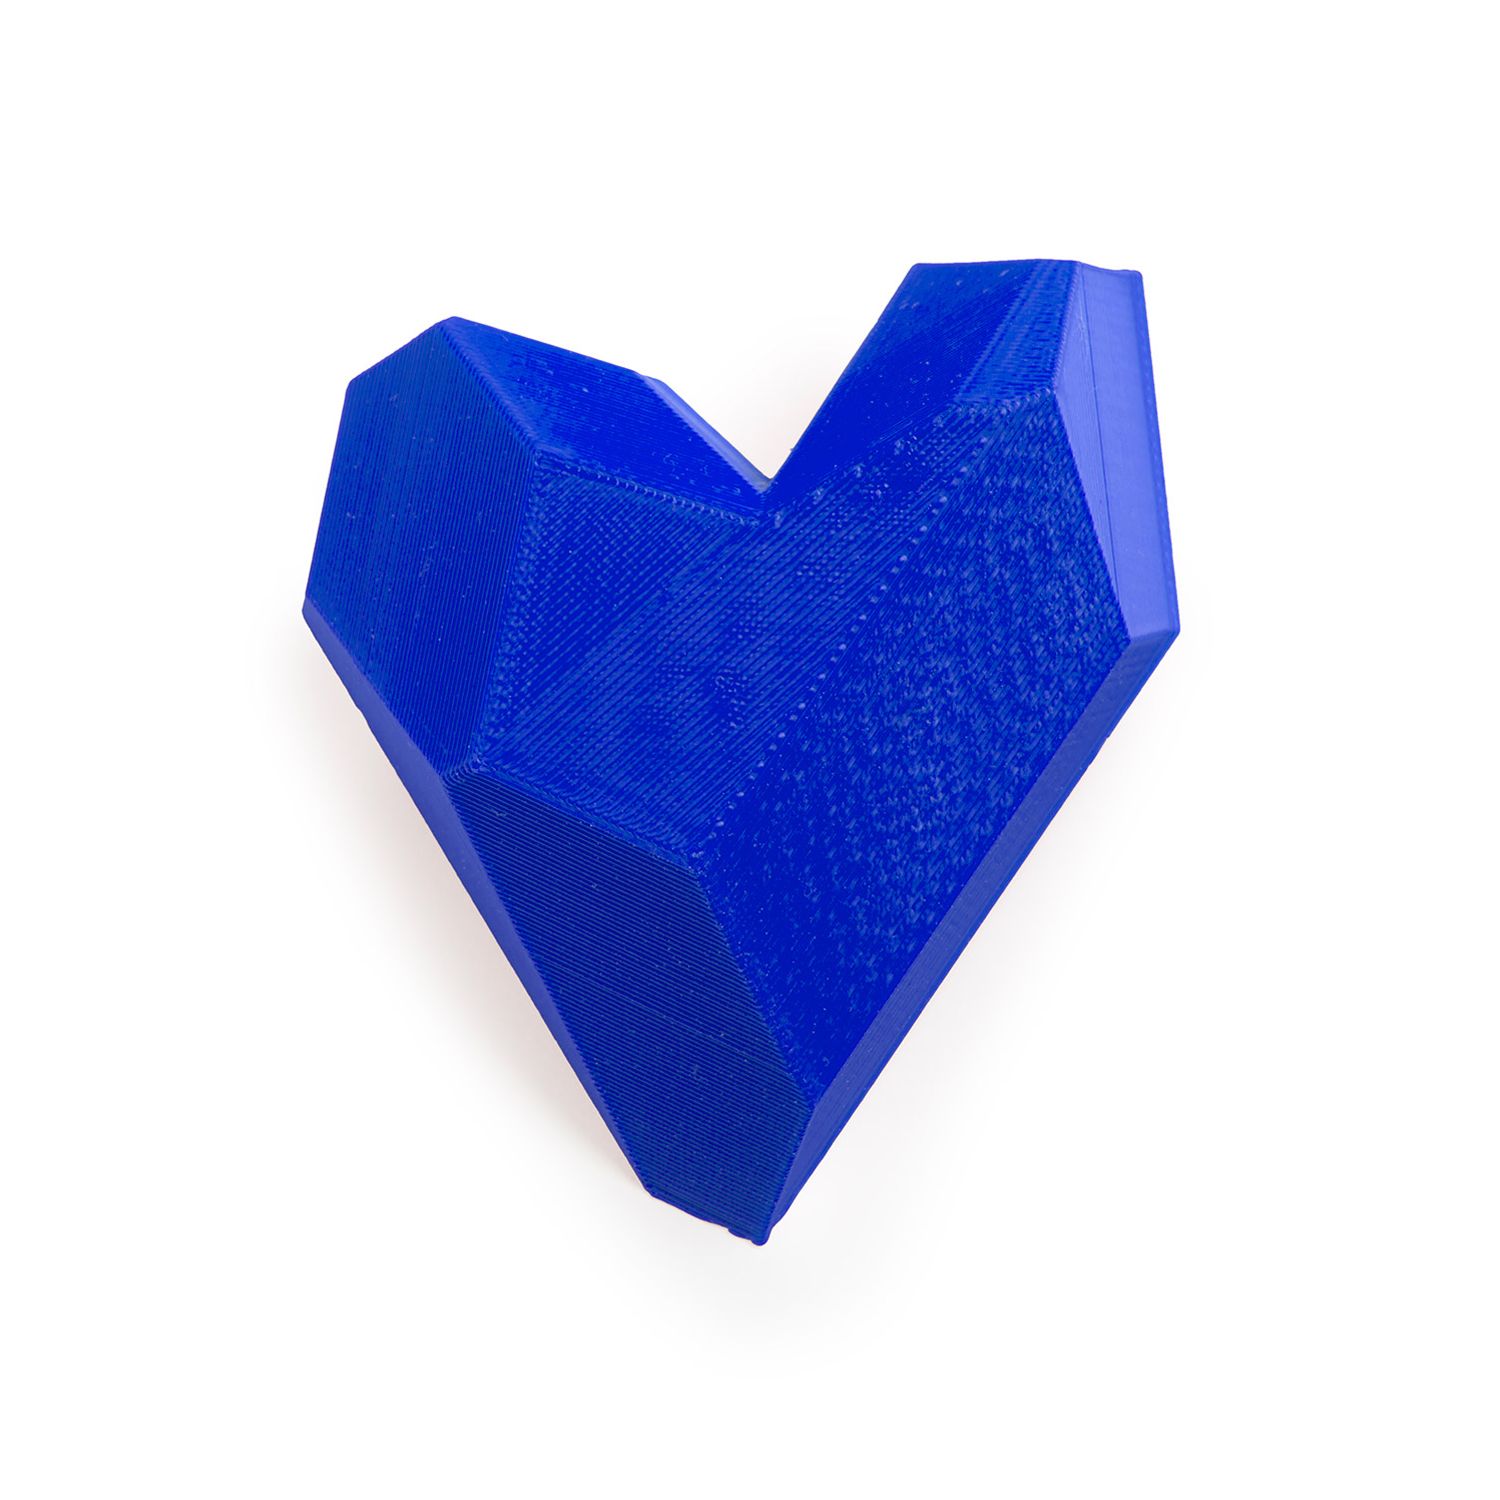 Maison 203: Heart Brooch – Blue Product Image 1 of 3